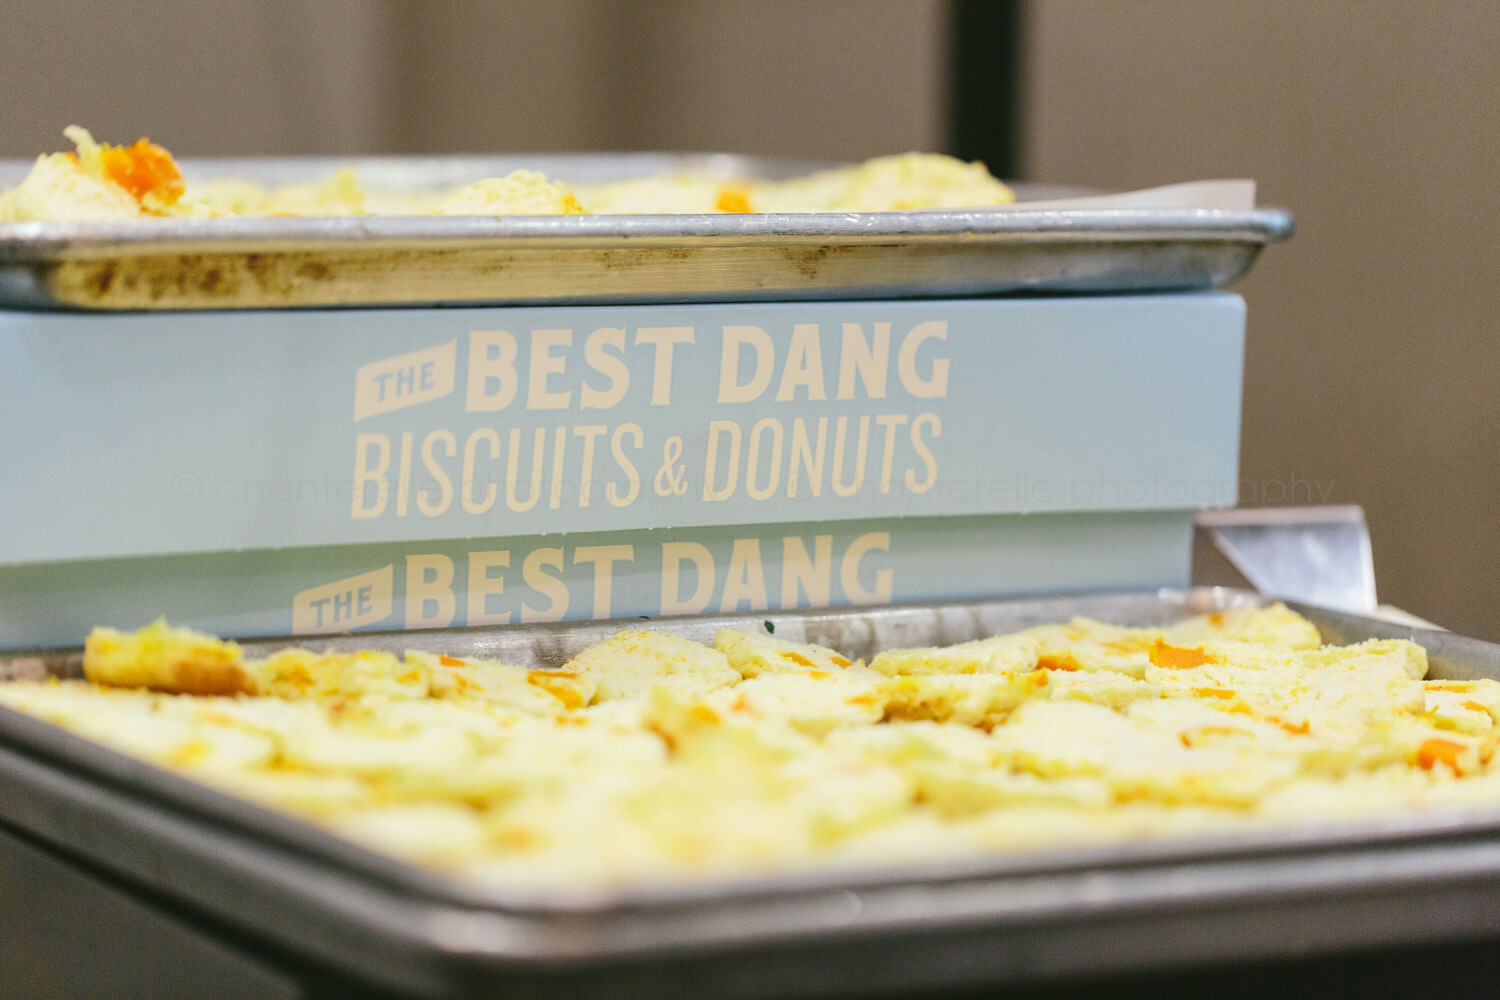 best dang biscuits and donuts at food conference